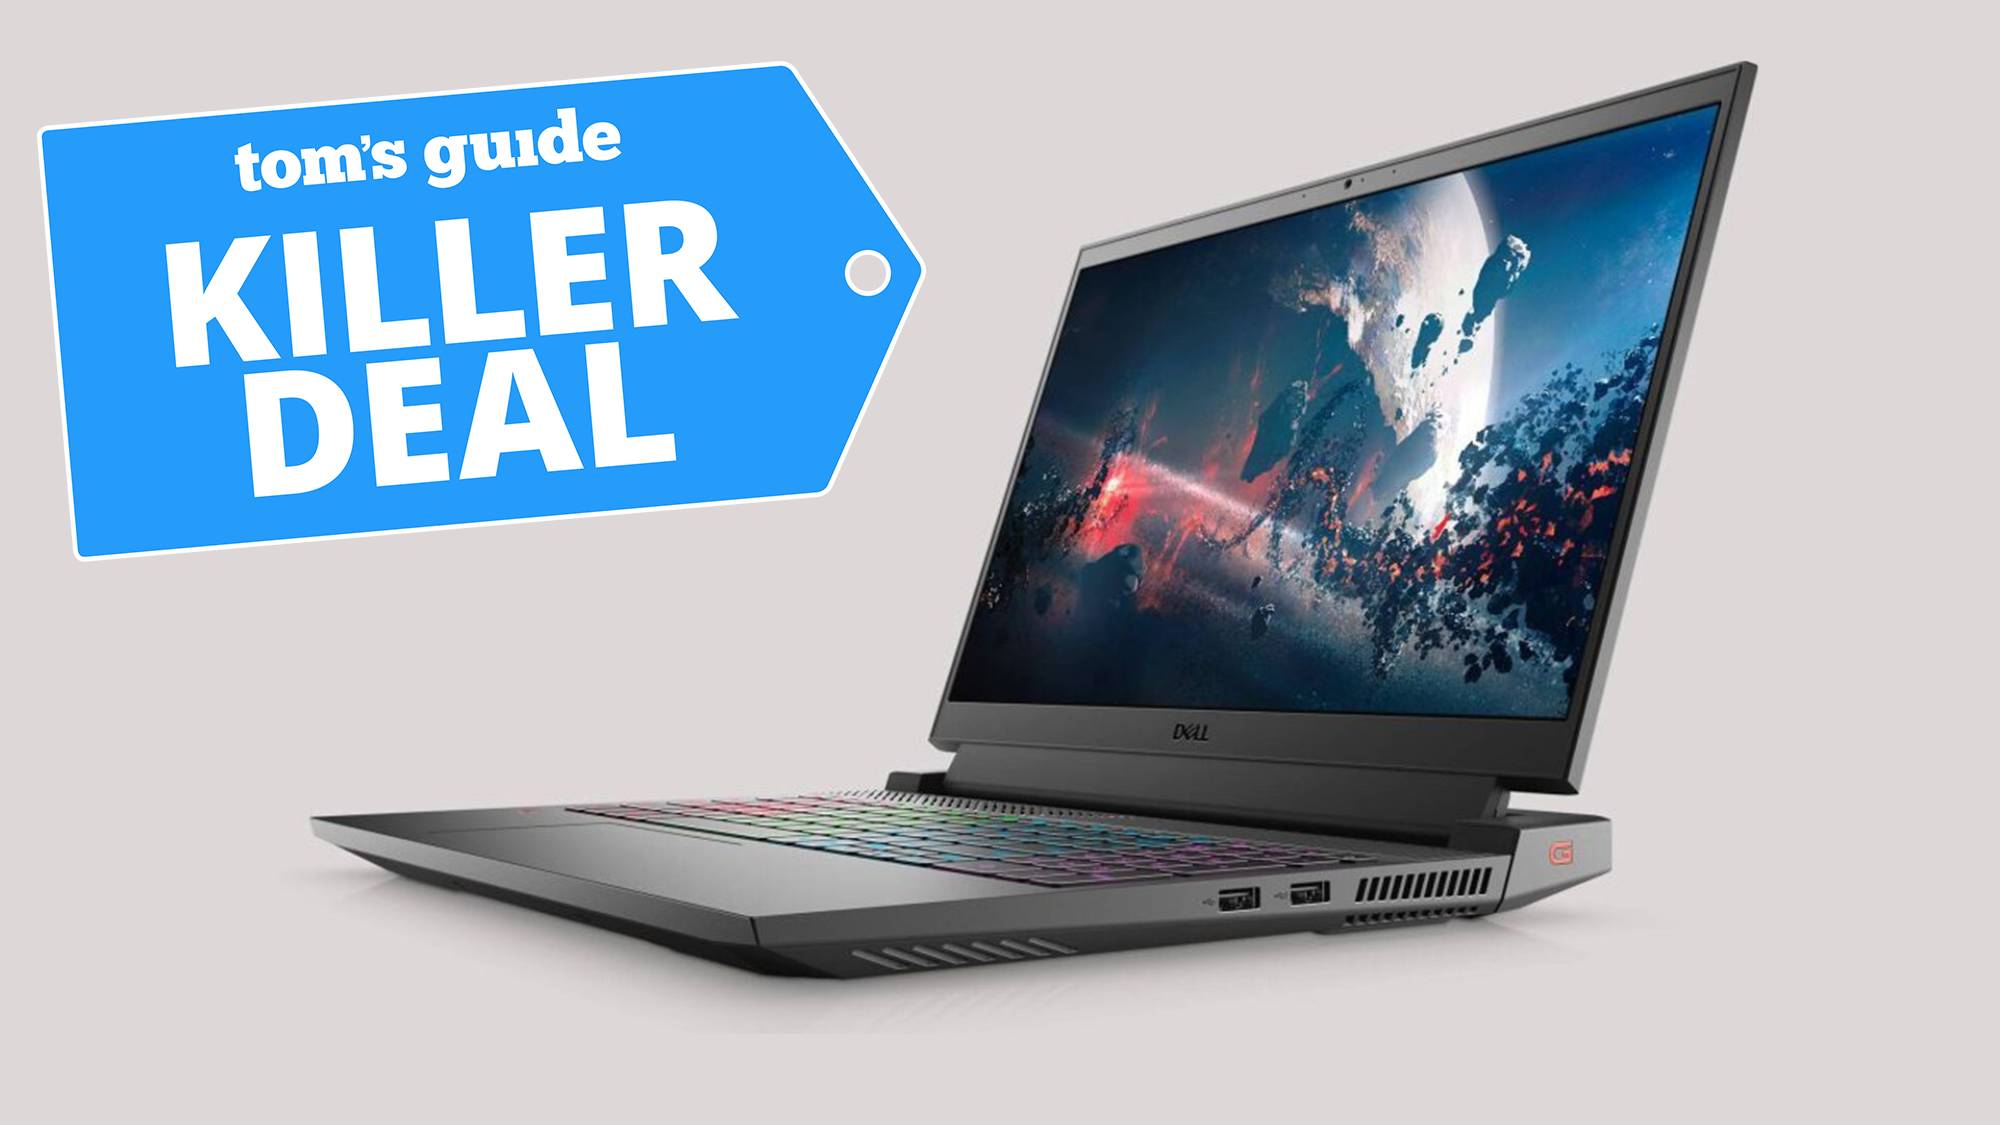 Dell G15 Gaming Laptop With Tom's Guide Deal Brand